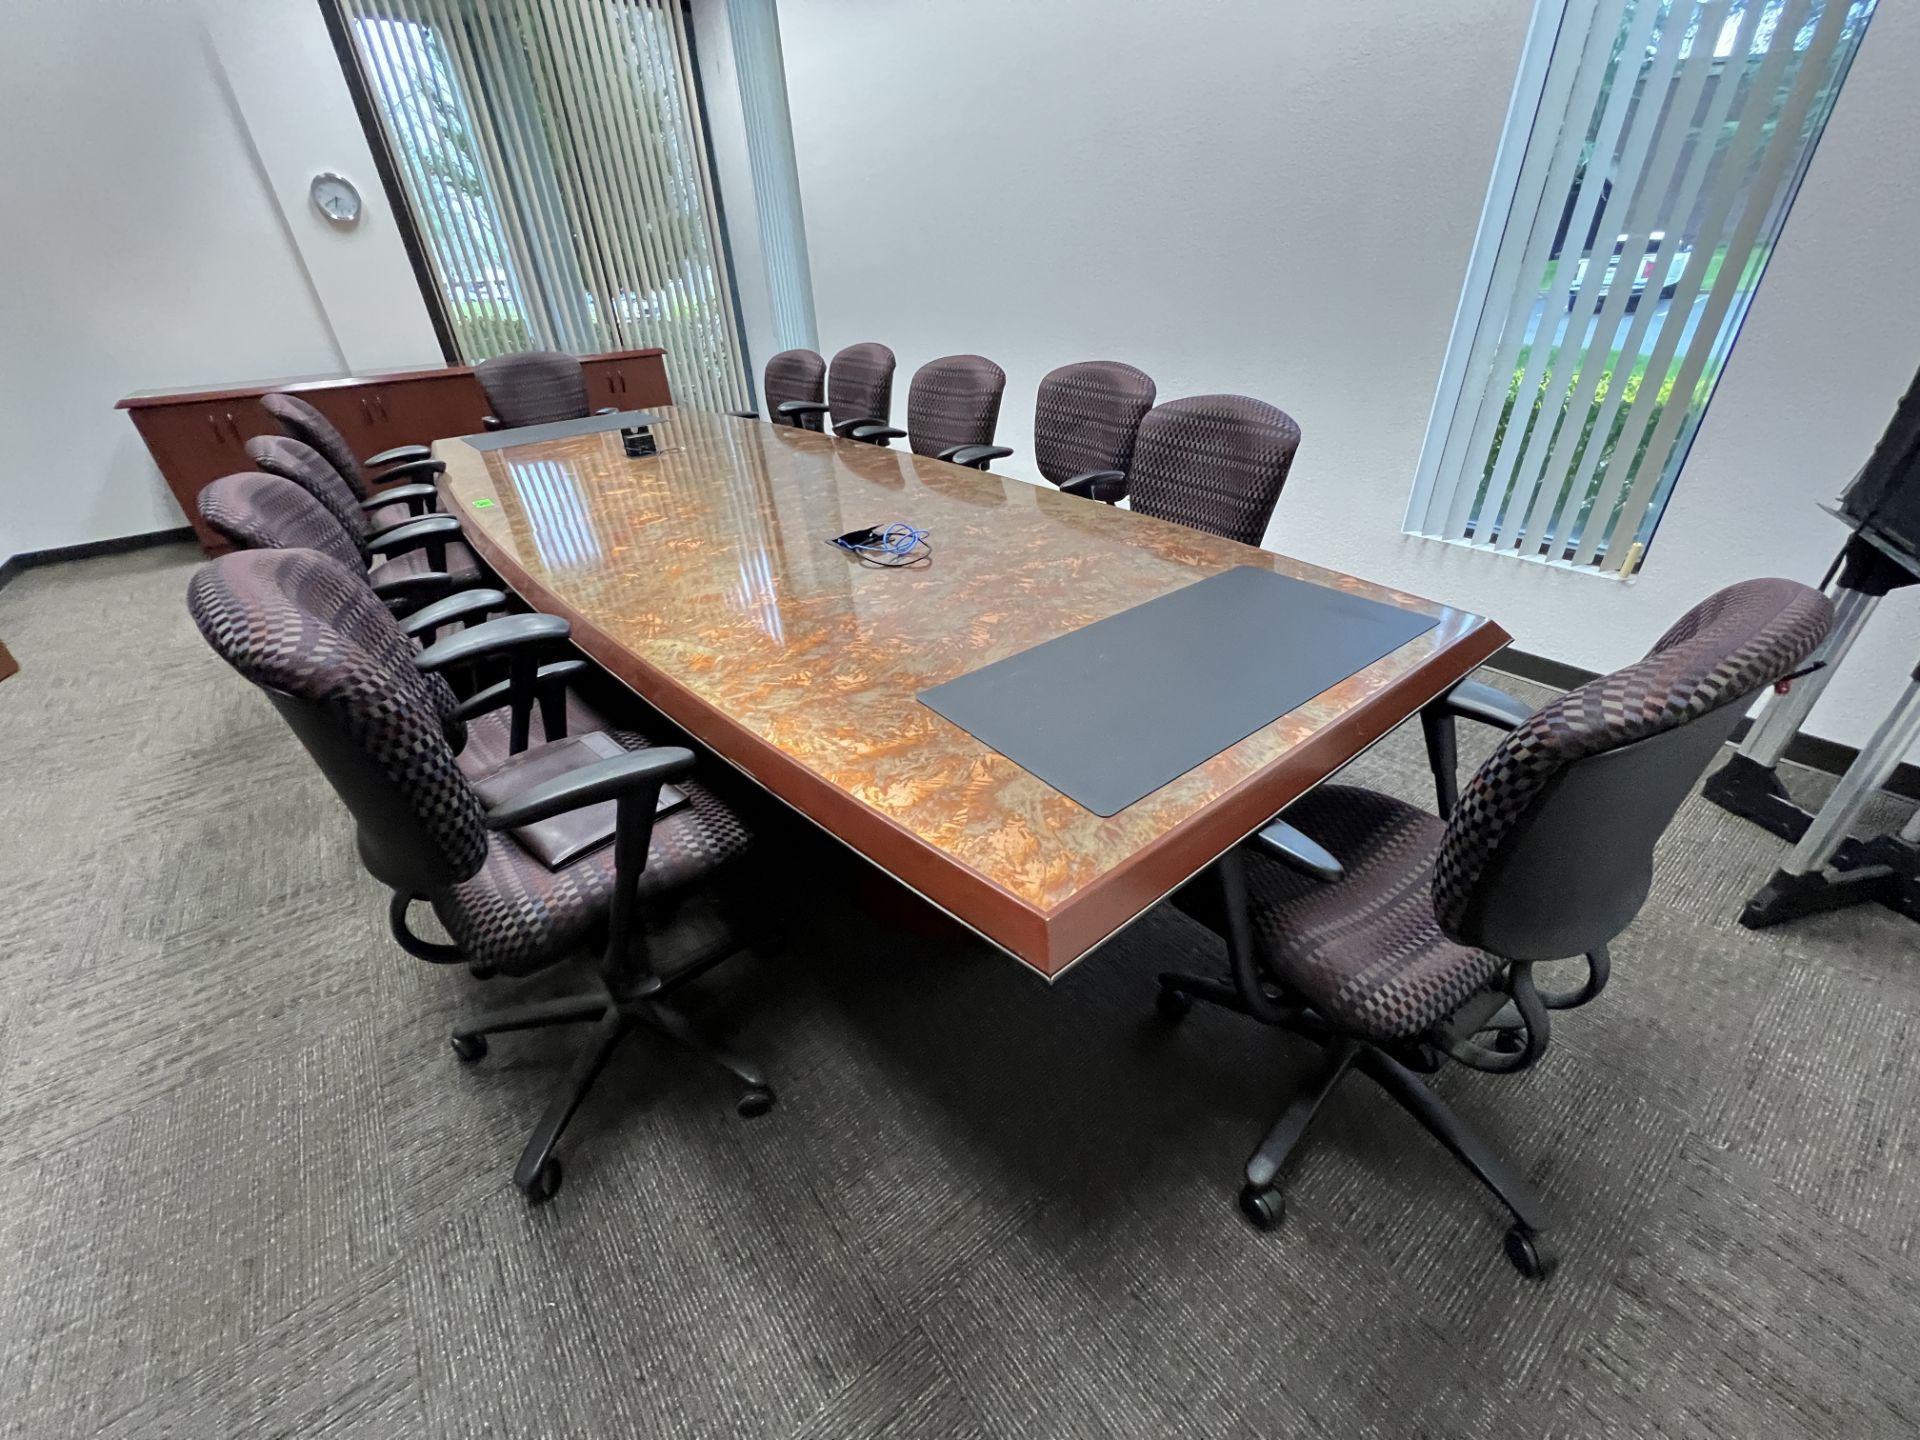 Main Conference Table